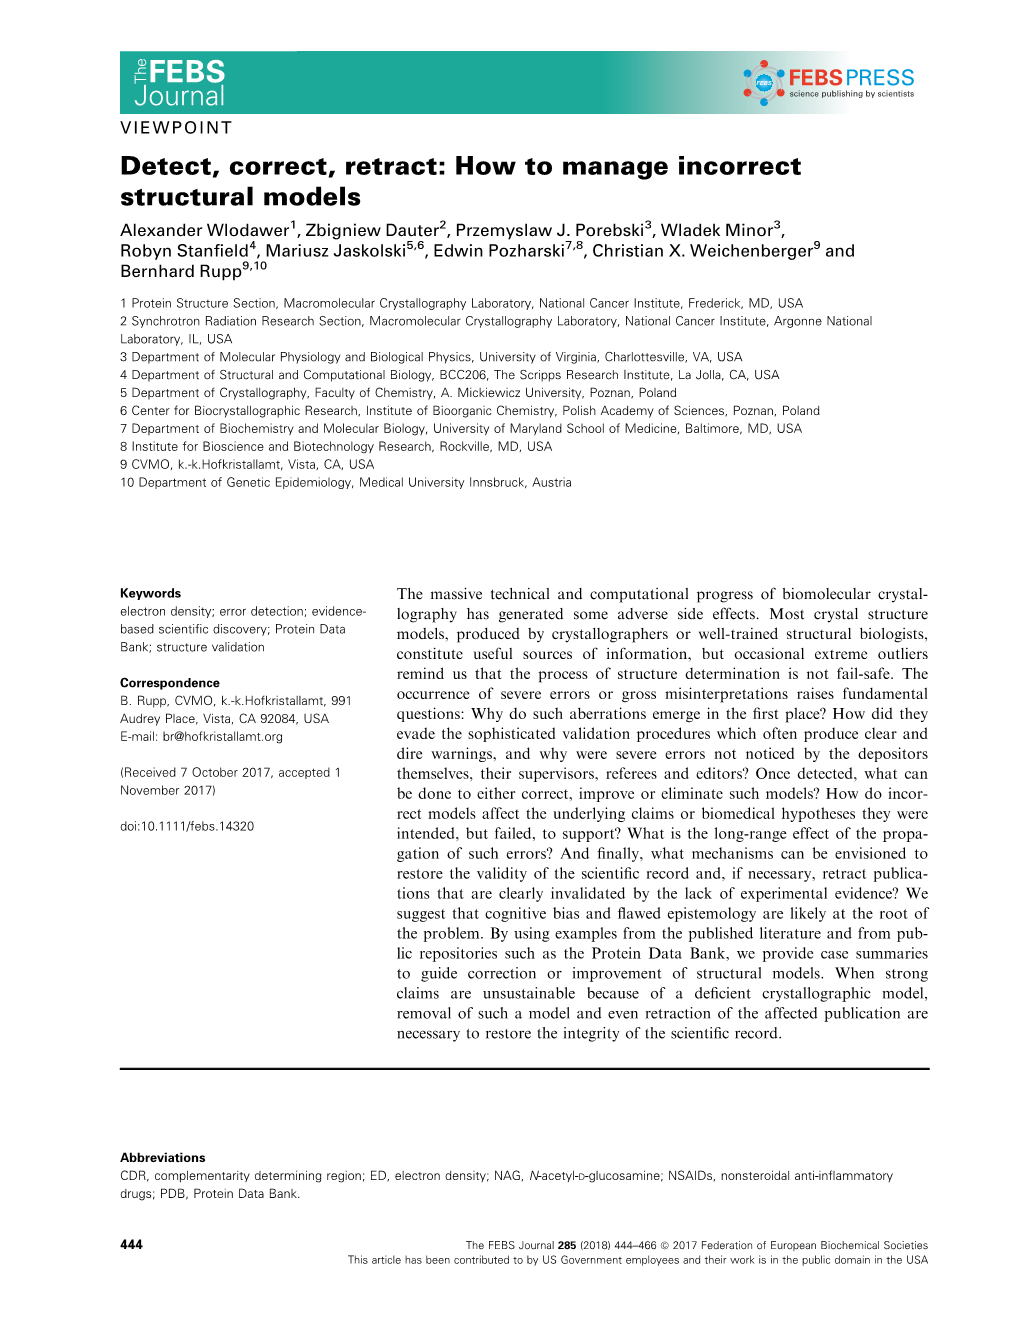 Detect, Correct, Retract: How to Manage Incorrect Structural Models Alexander Wlodawer1, Zbigniew Dauter2, Przemyslaw J